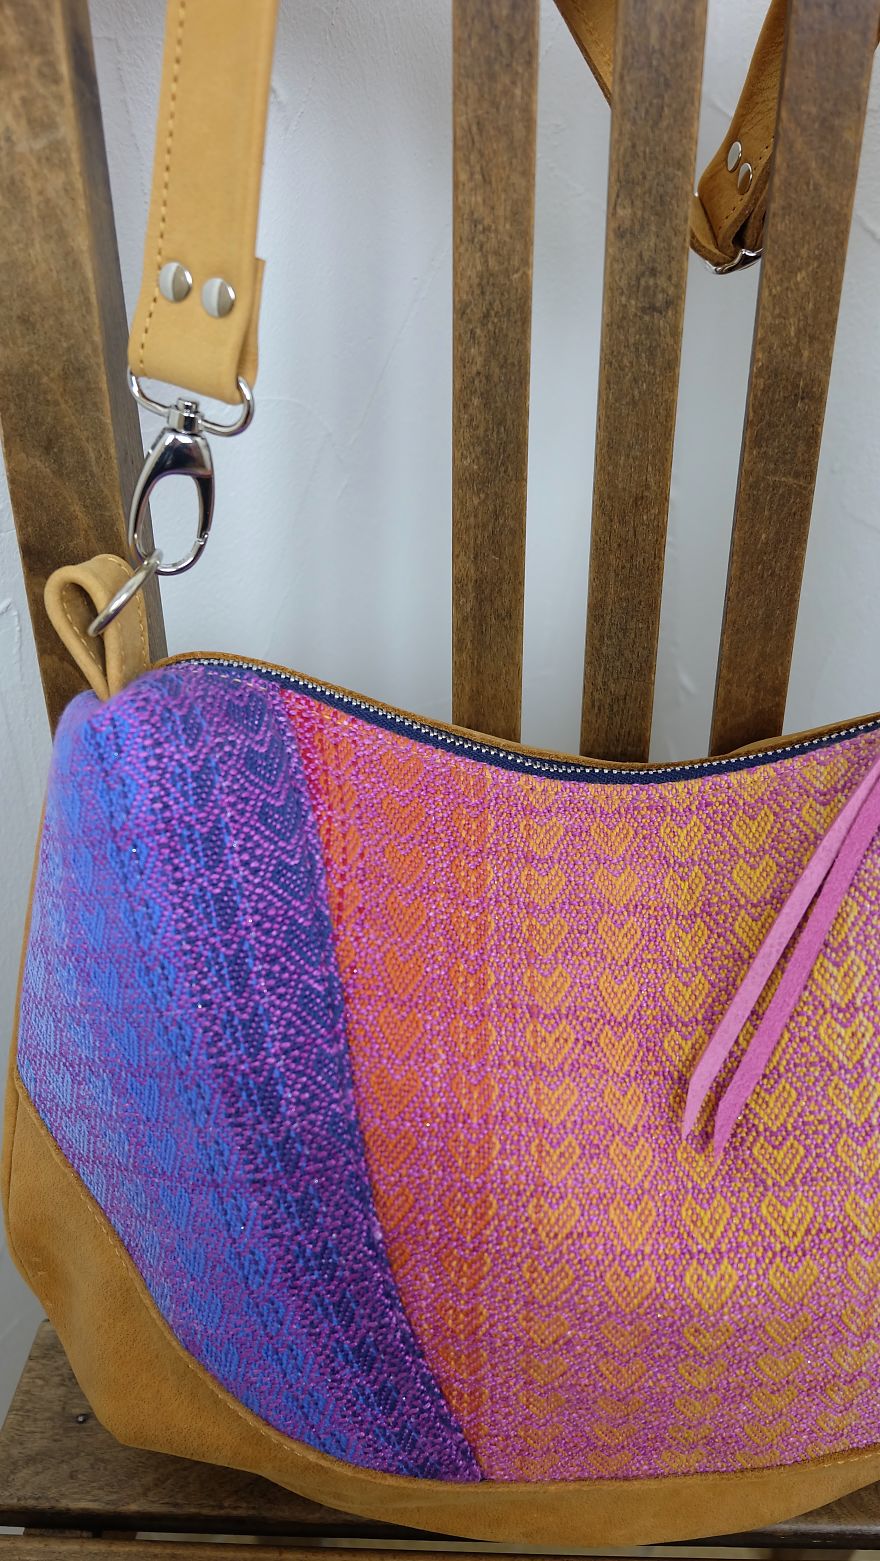 Handcrafted Unique Moonbag Made Of Genuine Leather And A Handwoven Piece Of A Babywrap